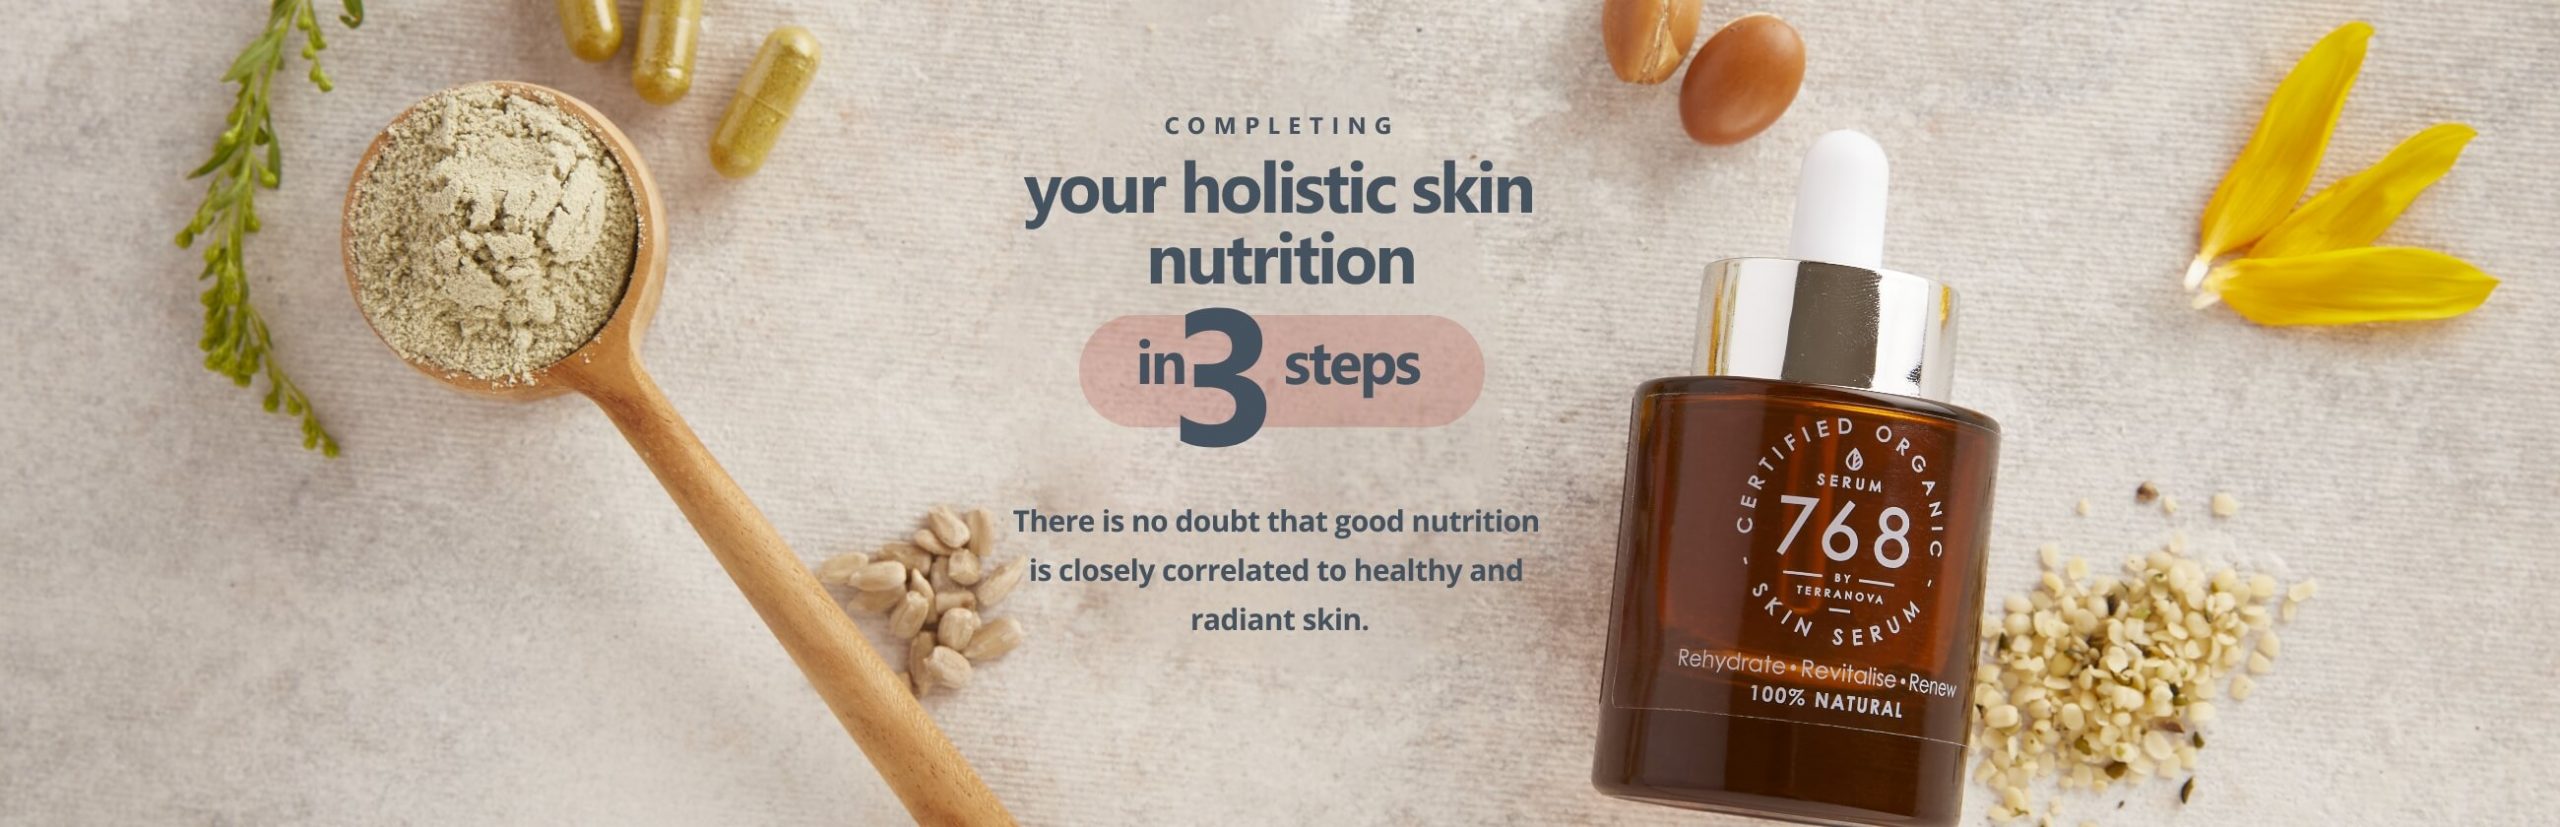 Completing your holistic skin nutrition in 3 steps